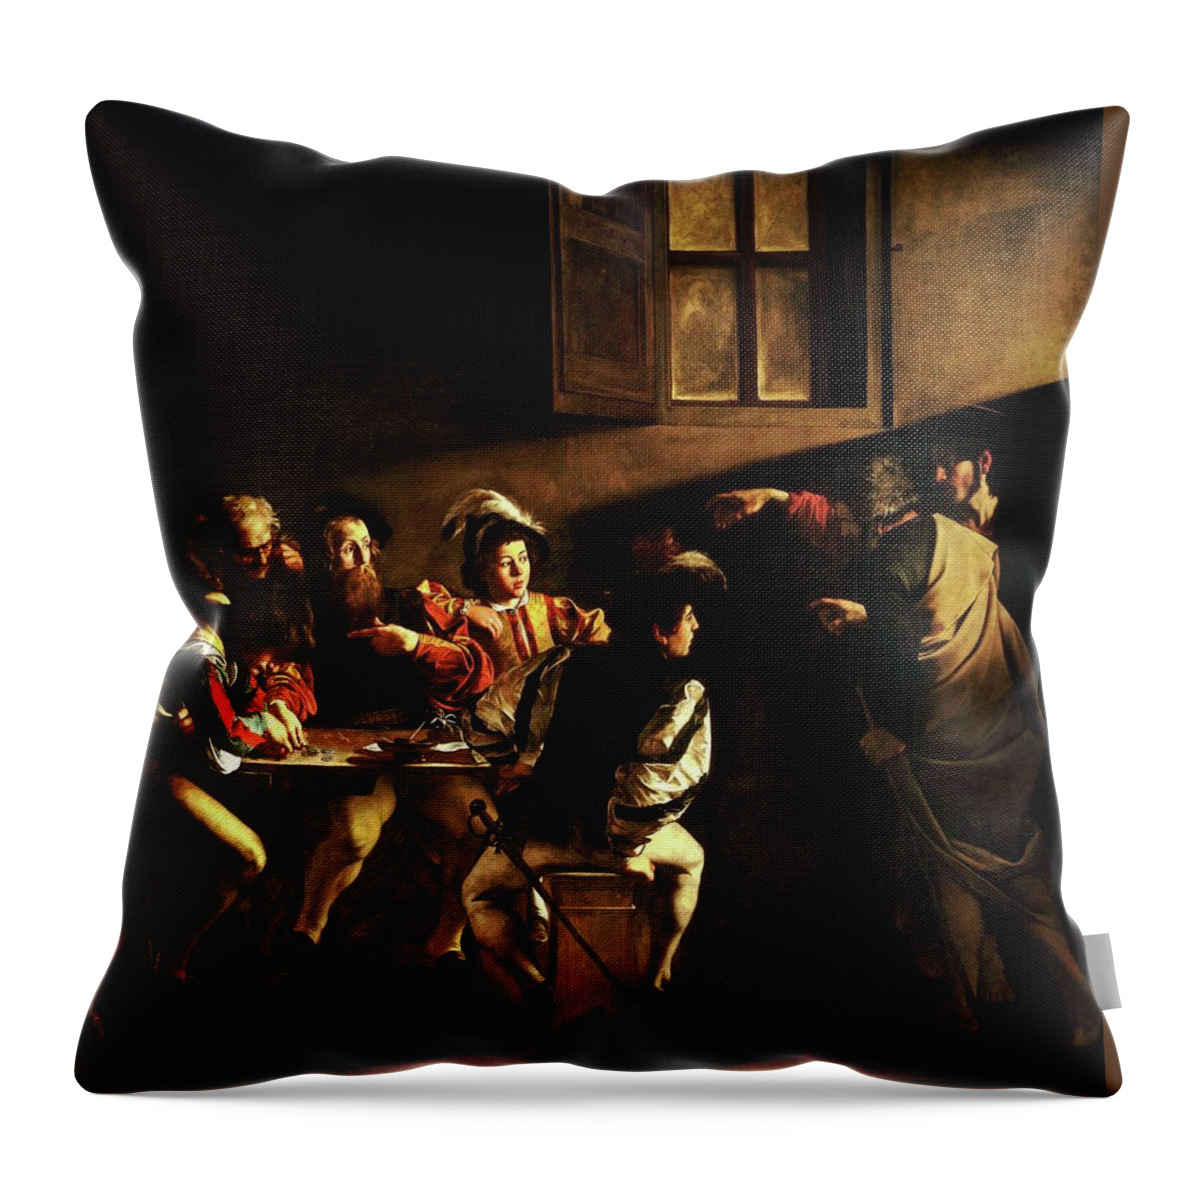 Calling Throw Pillow featuring the painting The Calling of St. Matthew by Michelangelo Caravaggio